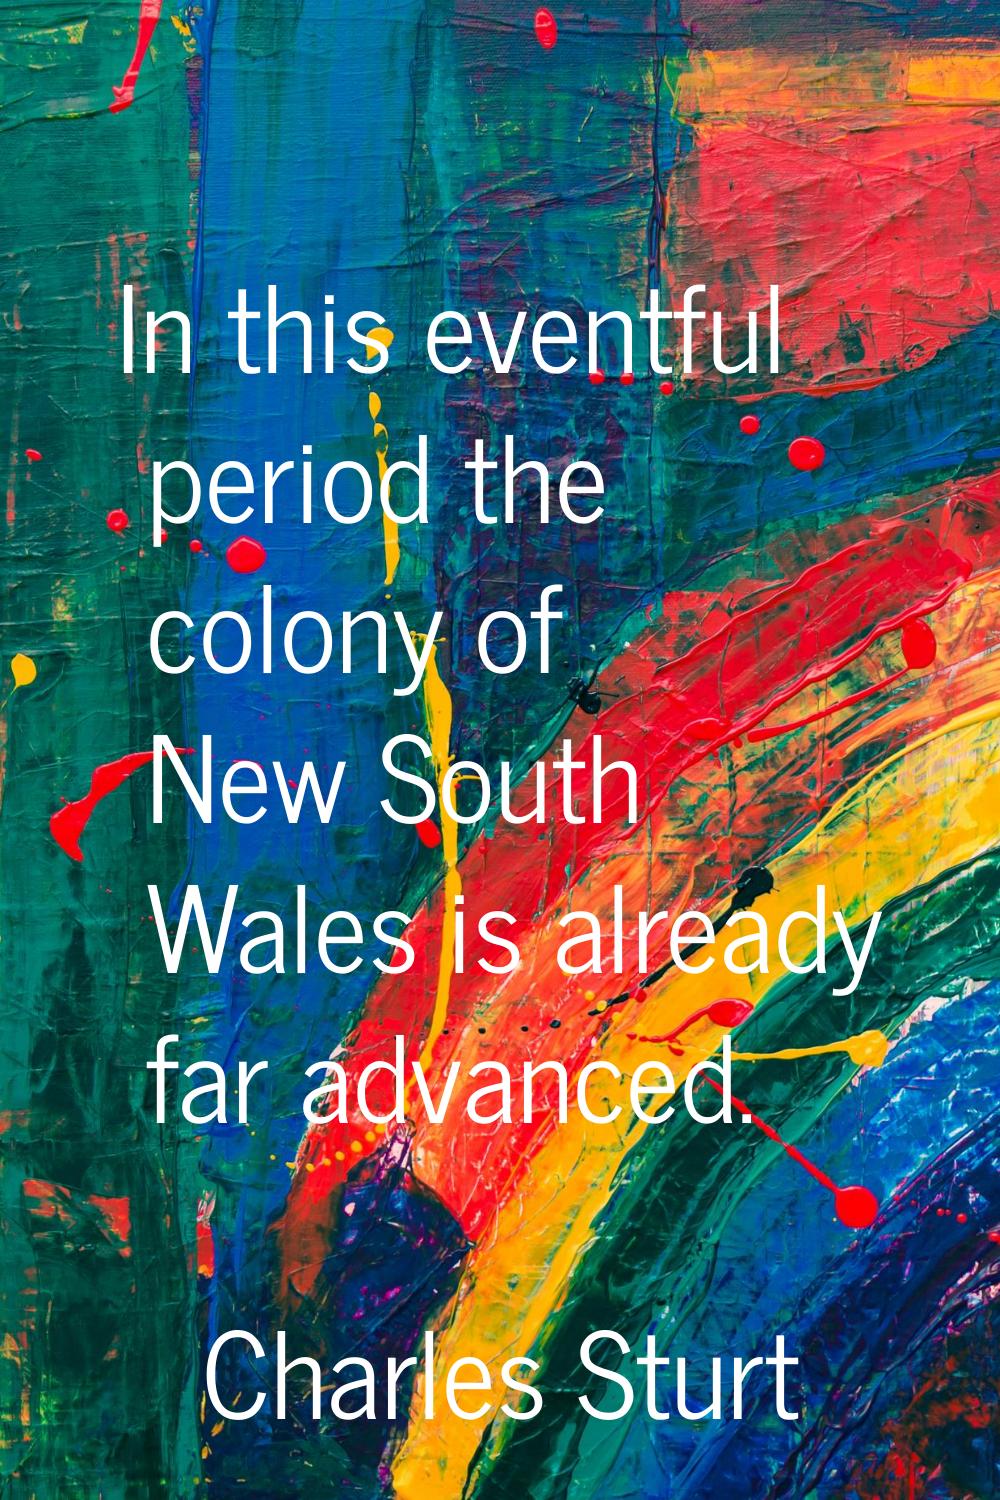 In this eventful period the colony of New South Wales is already far advanced.